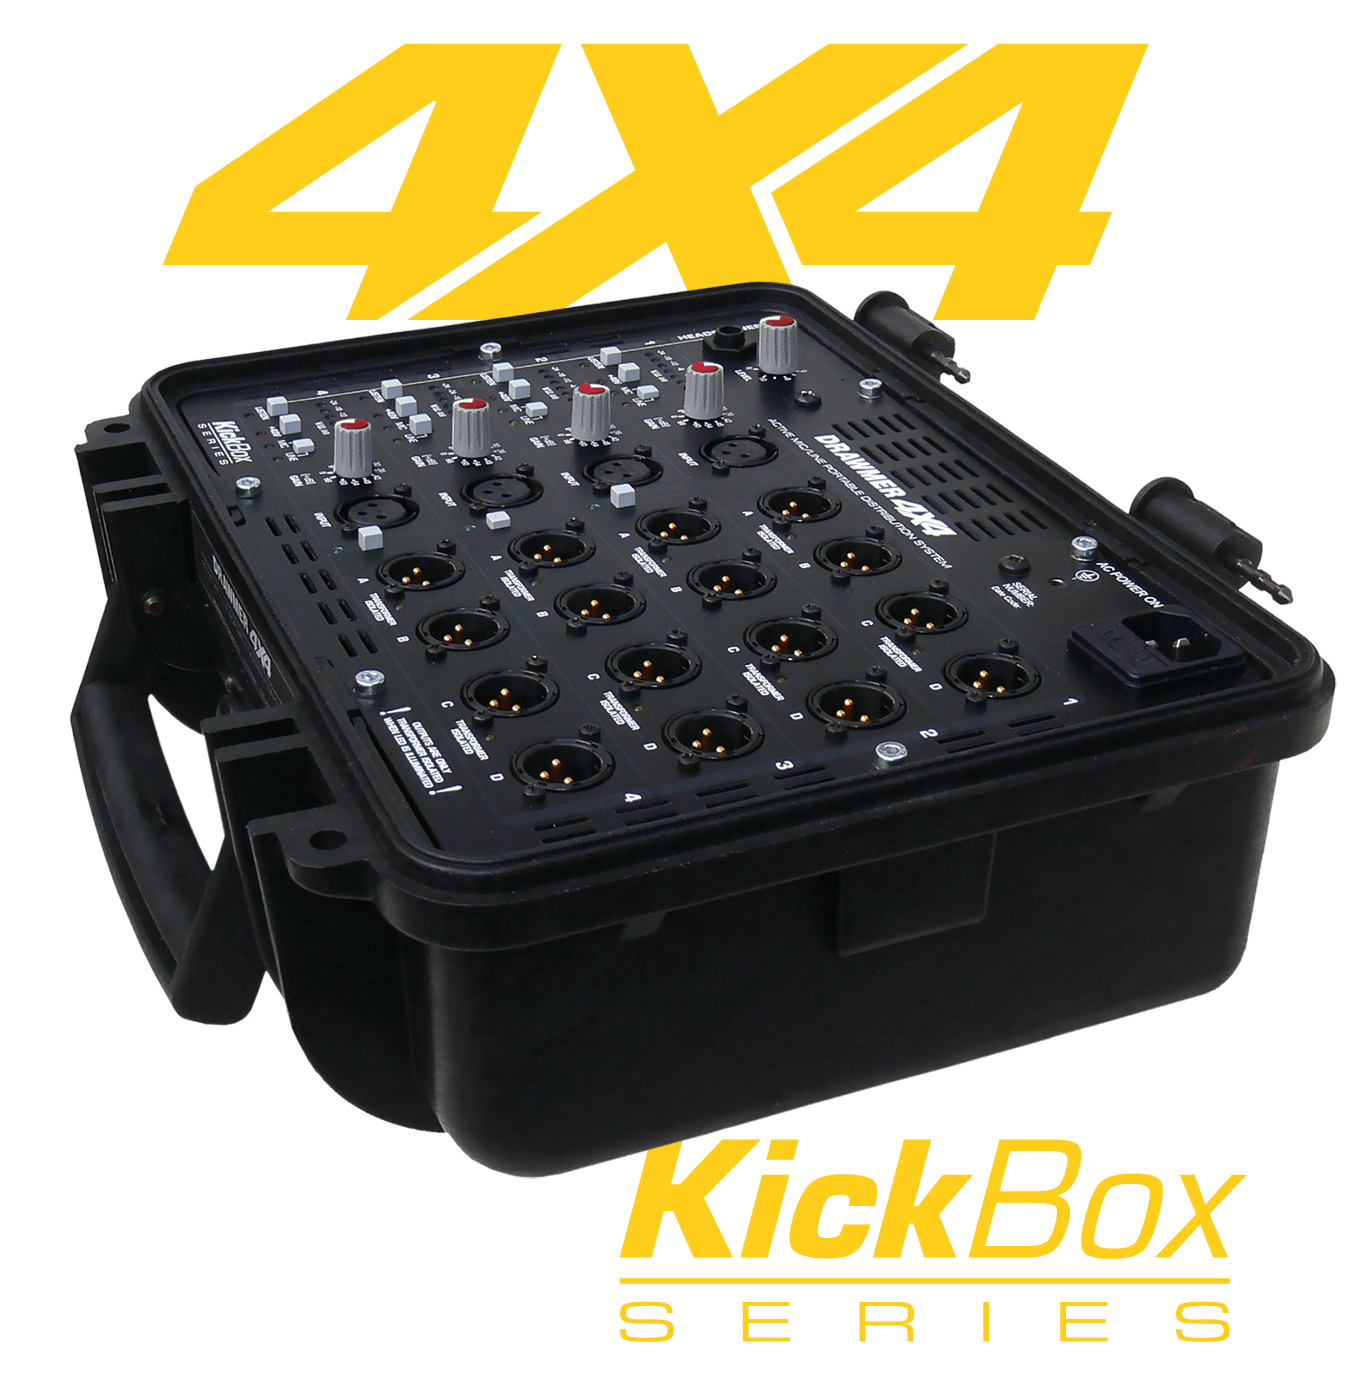 A view of the 4X4 Kickbox with the lid off